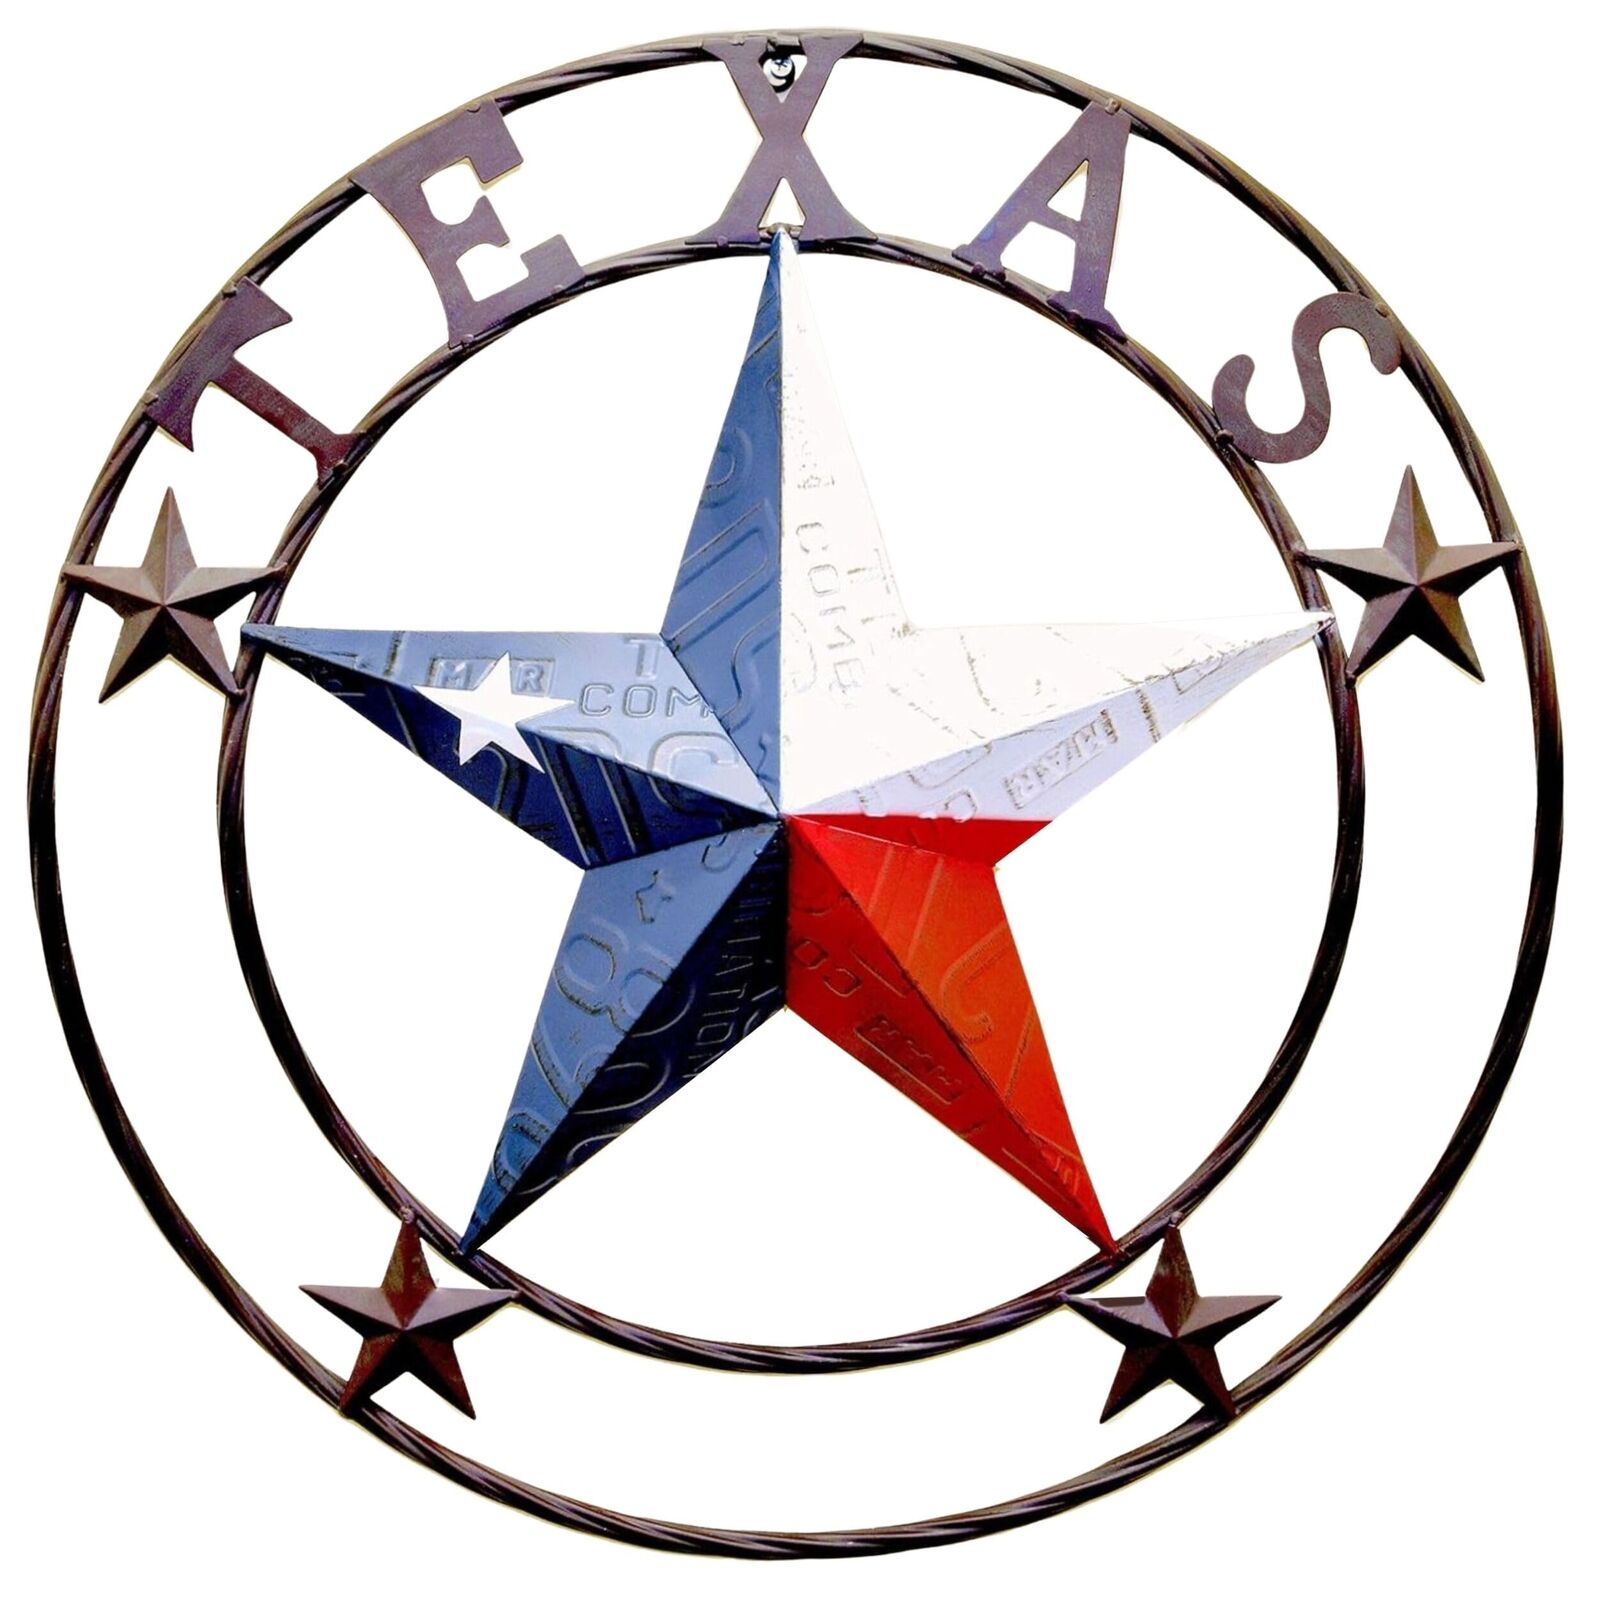 Rustic Metal Circle Texas License Plate Circle Star Wall Hanging Welcome Decor